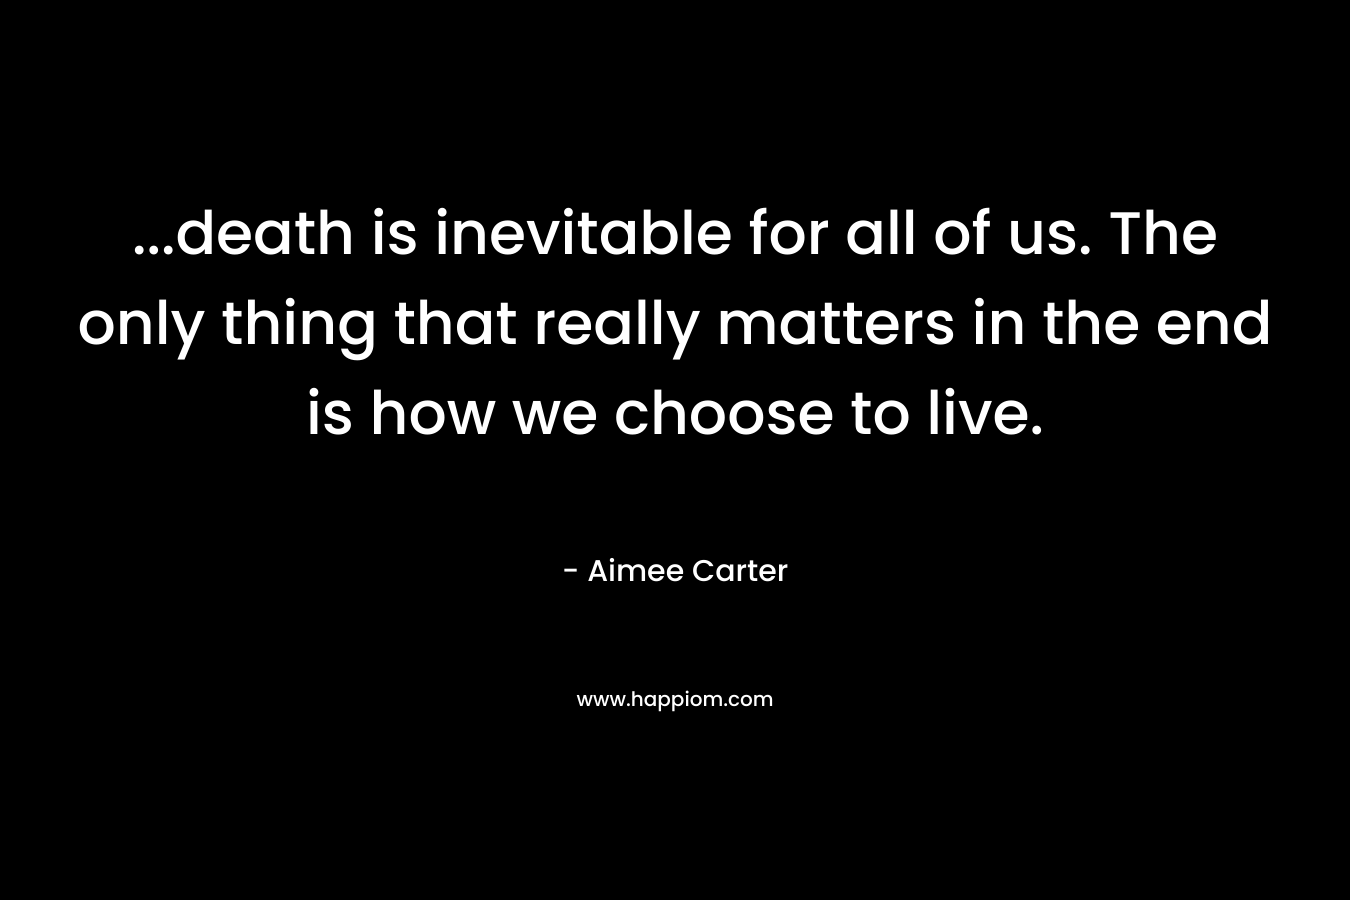 ...death is inevitable for all of us. The only thing that really matters in the end is how we choose to live.